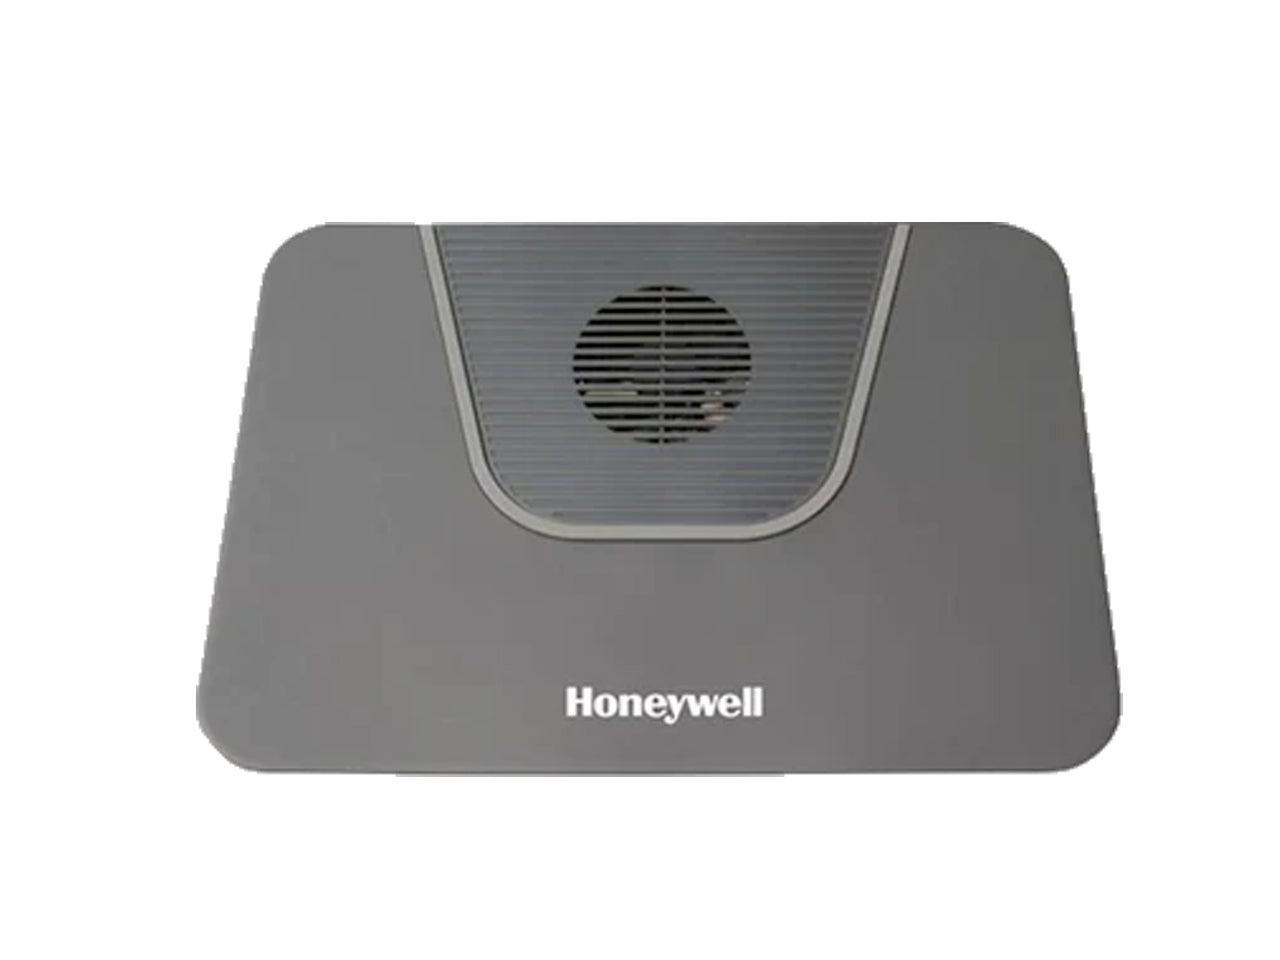 Honeywell Vogue Cool Laptop Cooling Pad